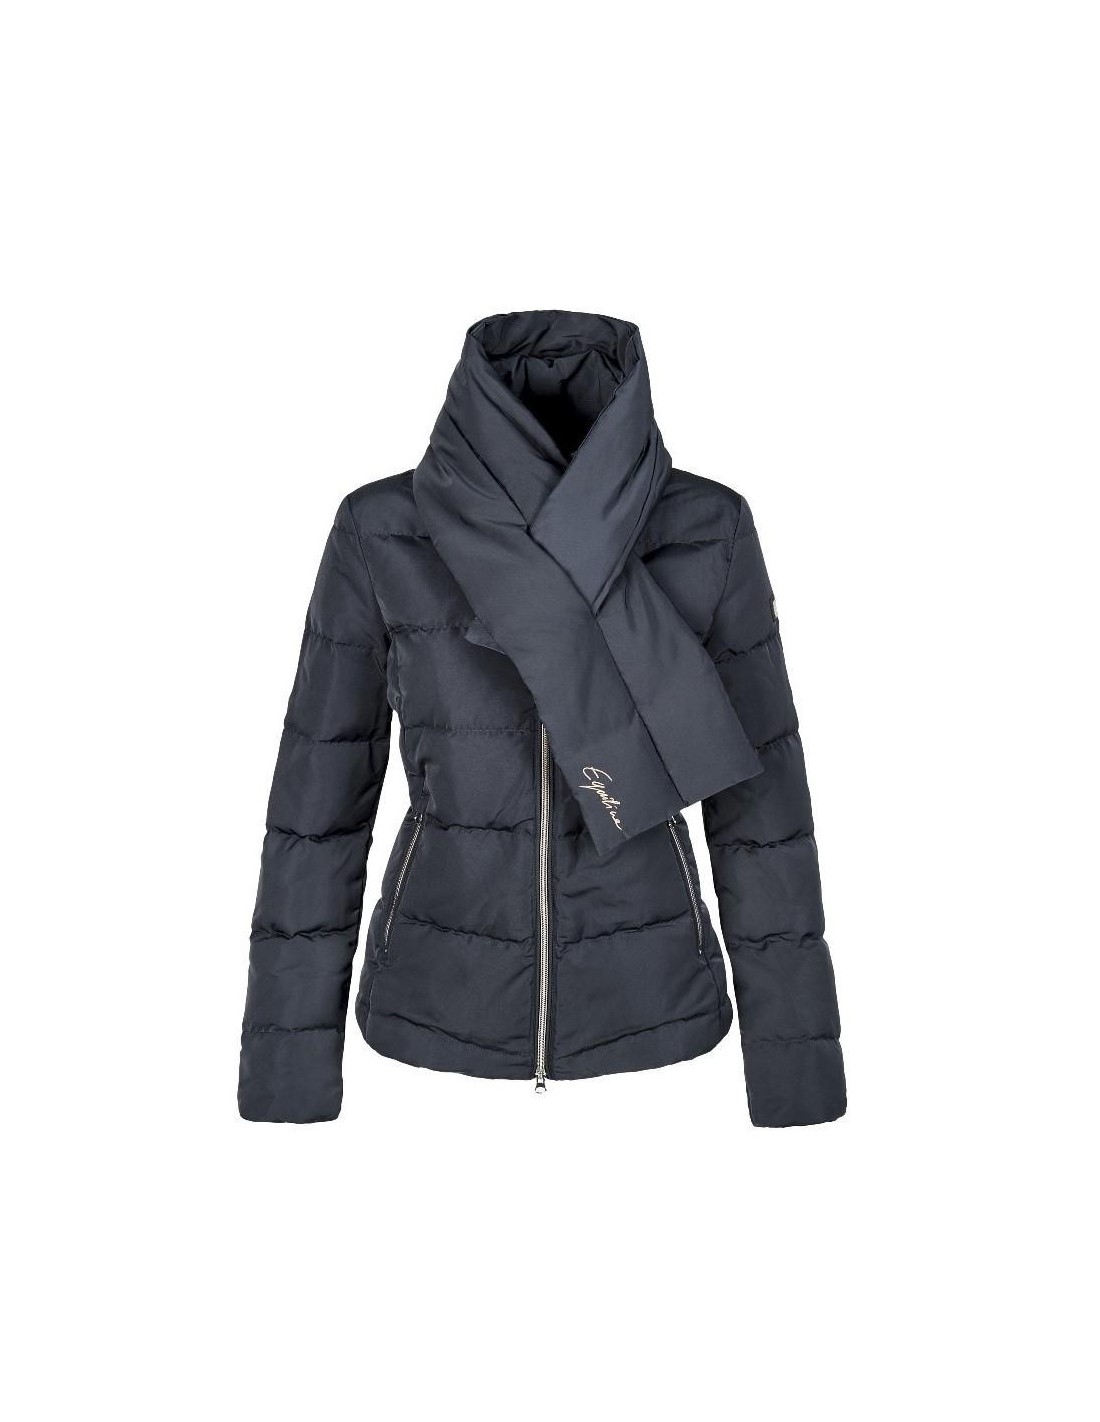 Women's Equiline padded jacket, Preppy mod